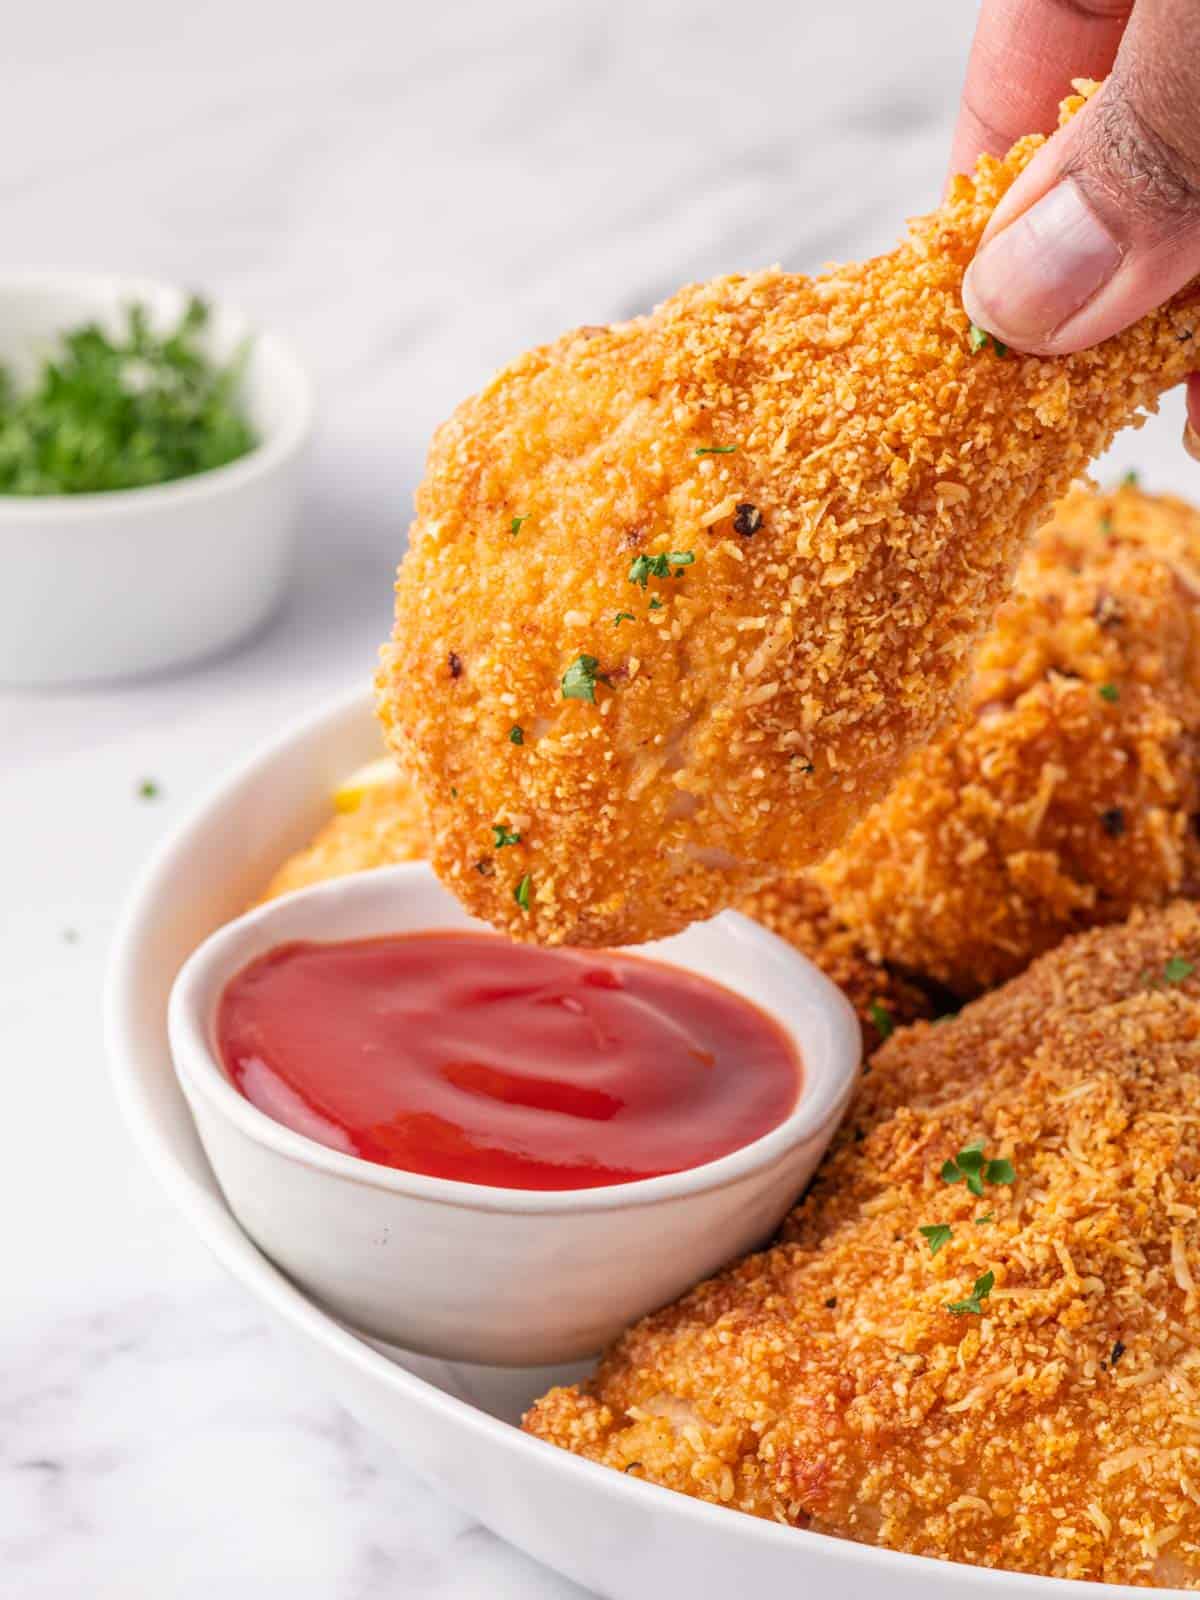 A keto fried chicken leg is dipped in sauce.